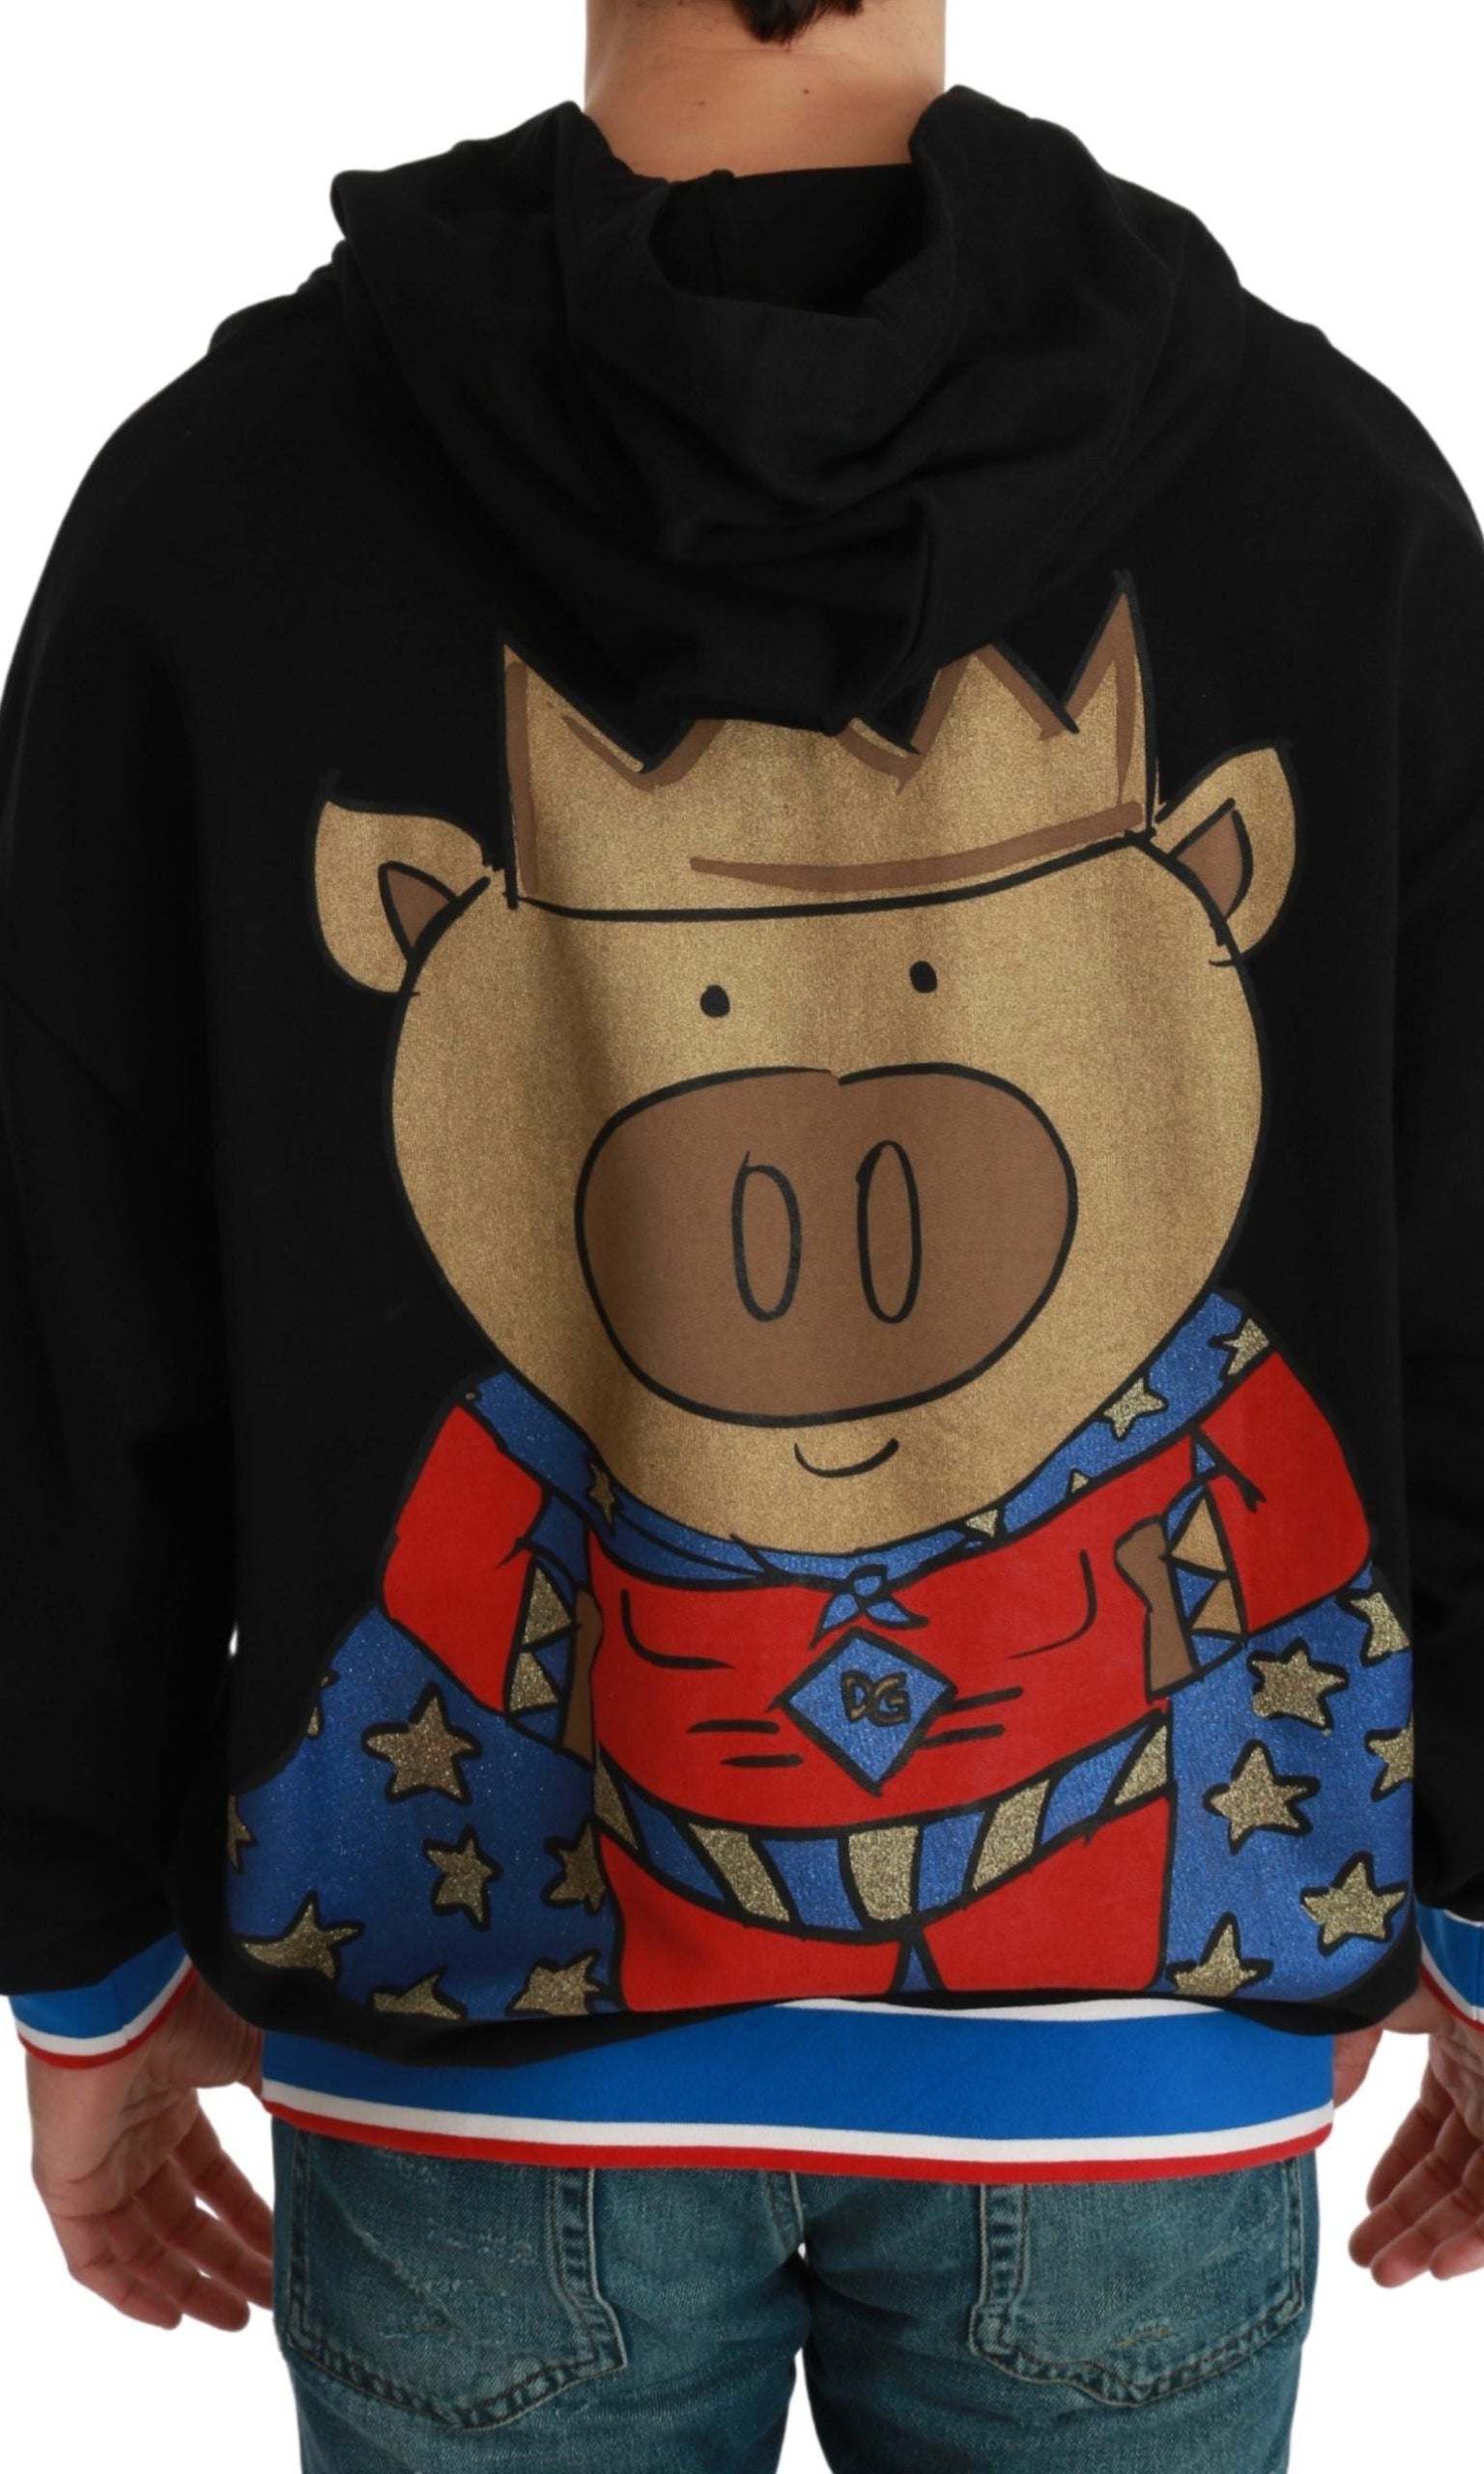 Dolce & Gabbana Black Sweater Pig of the Year Hooded GENUINE AUTHENTIC BRAND LLC